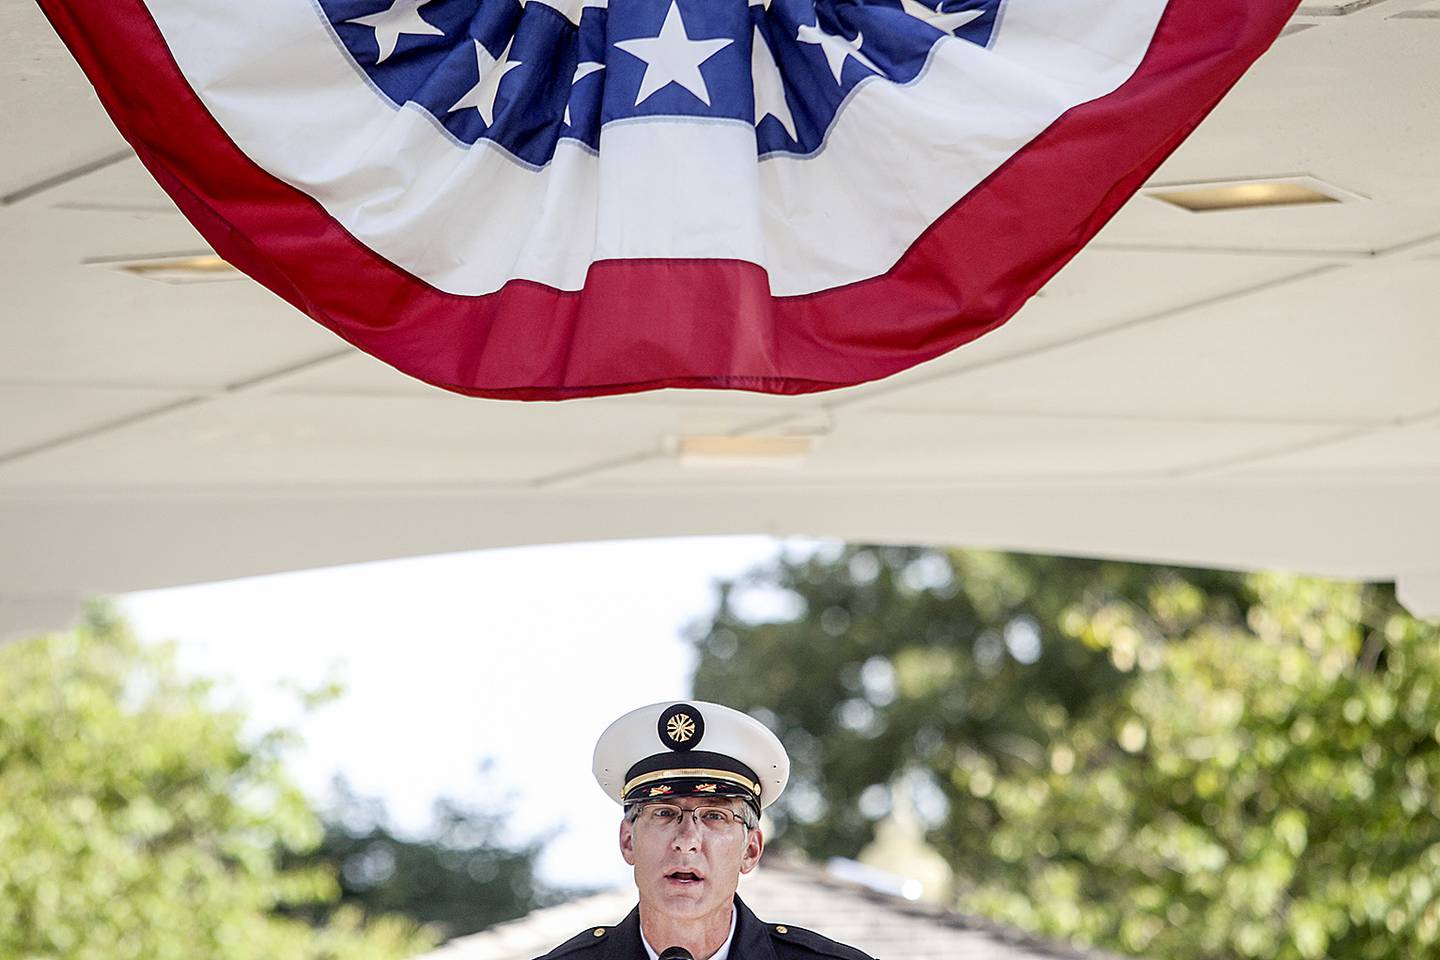 McHenry Township Fire Protection District Chief Tony Huemann speaks during a commemoration Wednesday, Sept. 11, 2013,  at Veterans Memorial Park in McHenry to honor those lost in the Sept. 11 terrorist attacks.